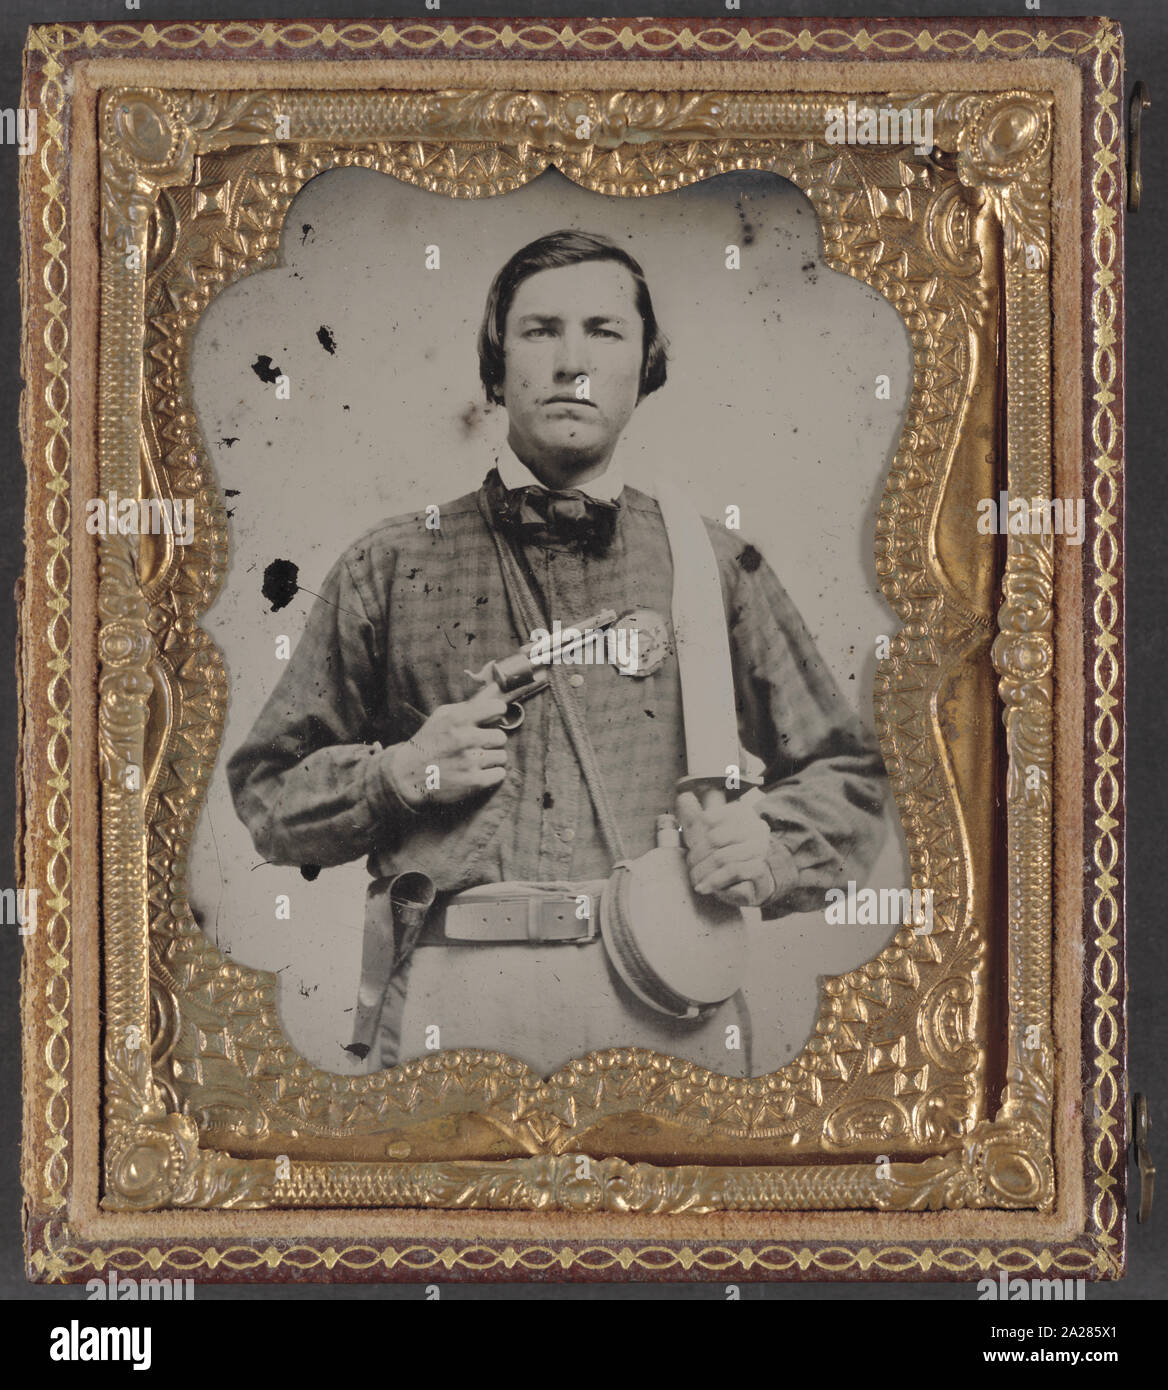 Private David C. Colbert of Company C, 46th Virginia Infantry Regiment, with secession badge, canteen, pistol, and Bowie knife Stock Photo